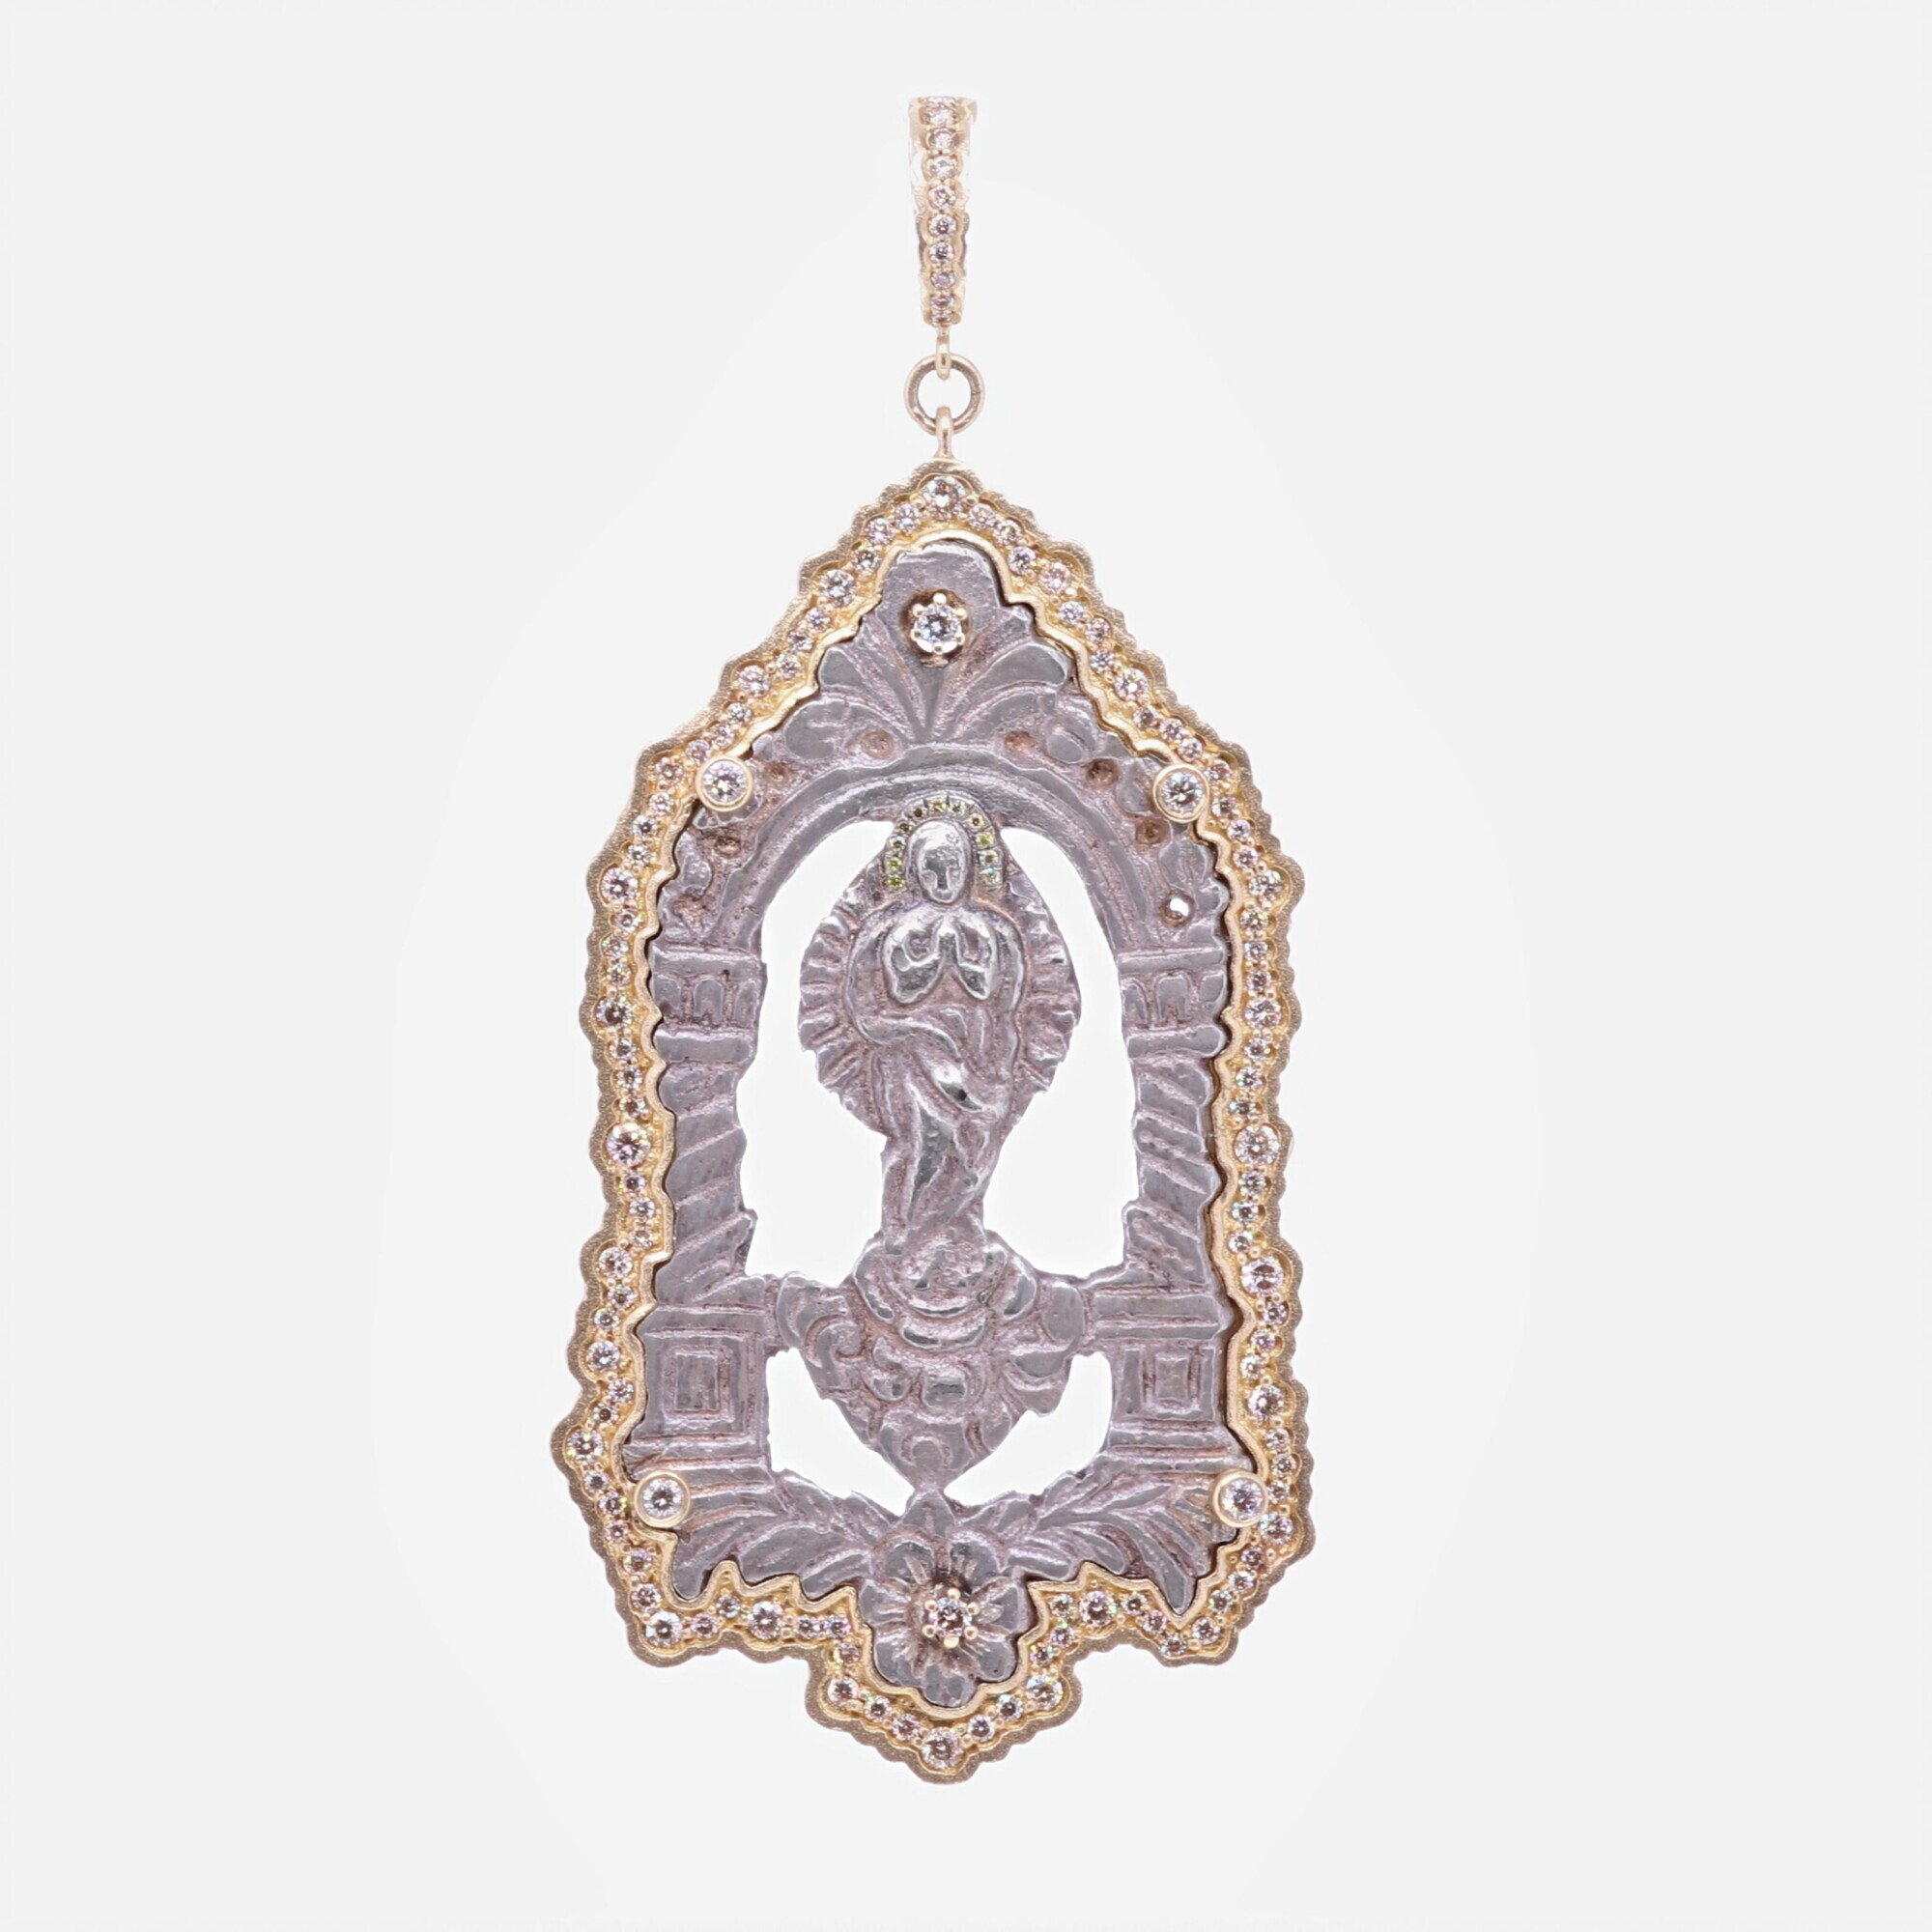 Immaculate Conception Mary Pendant